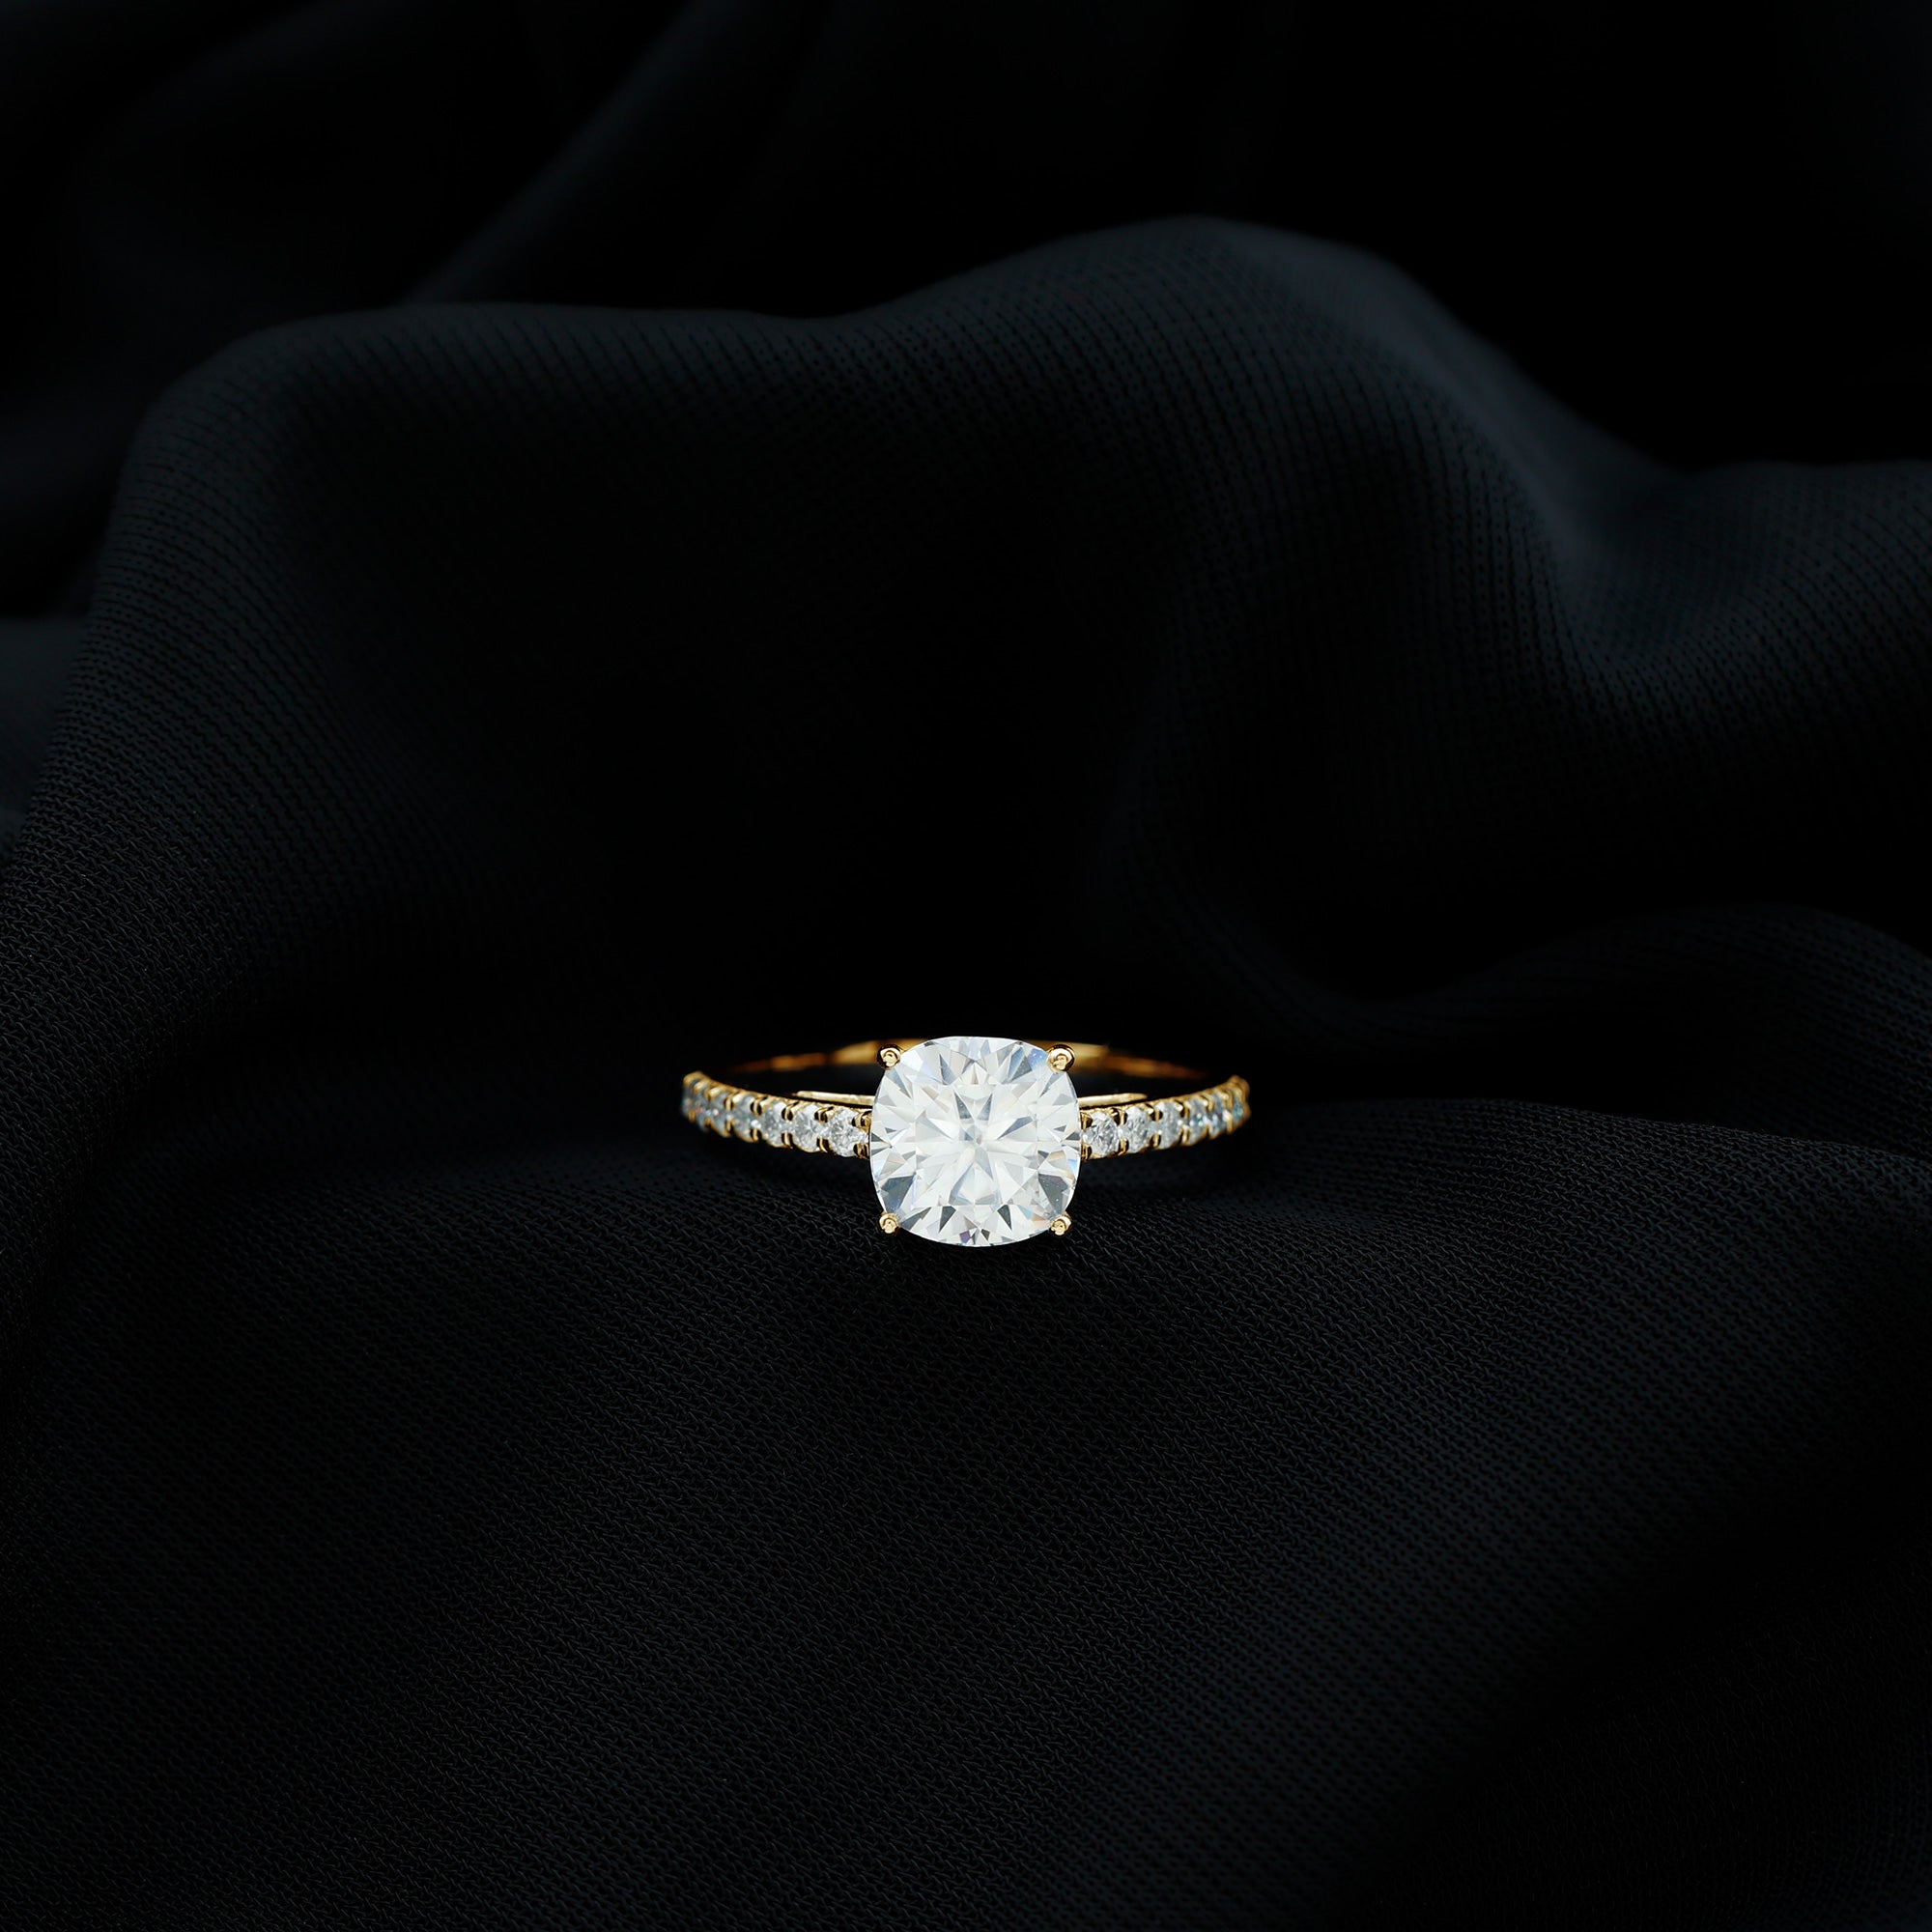 2.50 CT Cushion Cut Moissanite Solitaire Ring with Side Stones Moissanite - ( D-VS1 ) - Color and Clarity - Rosec Jewels